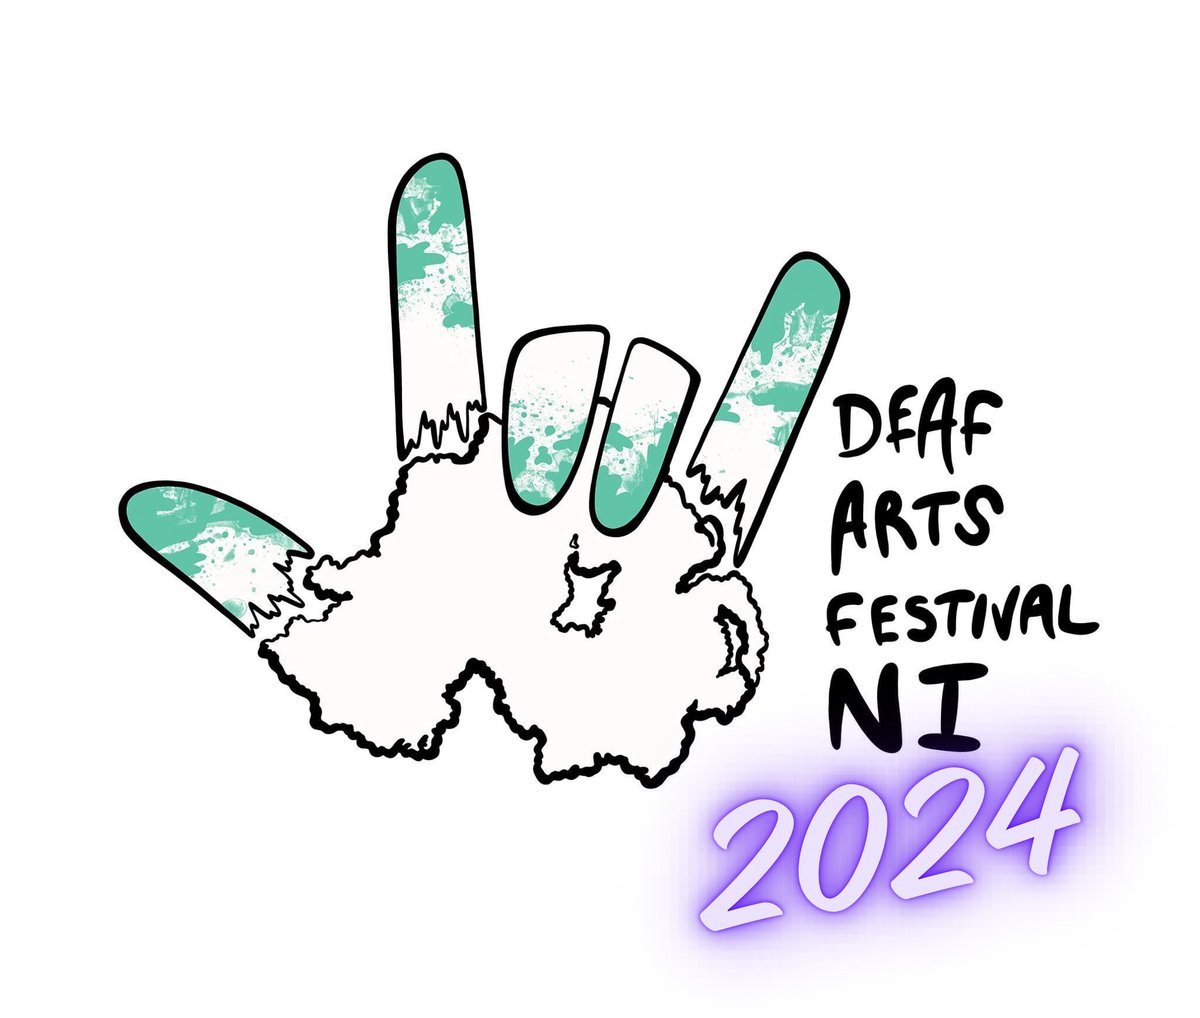 Deaf Arts Festival NI is BACK! An accessible festival for both d/Deaf & hearing 💜 20 events 29-31 March - theatre, craft, street art, workshops etc you won't want to miss out 🤟 Fab artists: included @RinkooBarpaga, @Paulaclarke777, @shaunblaney 🎭 themaclive.com/your-visit/dea…